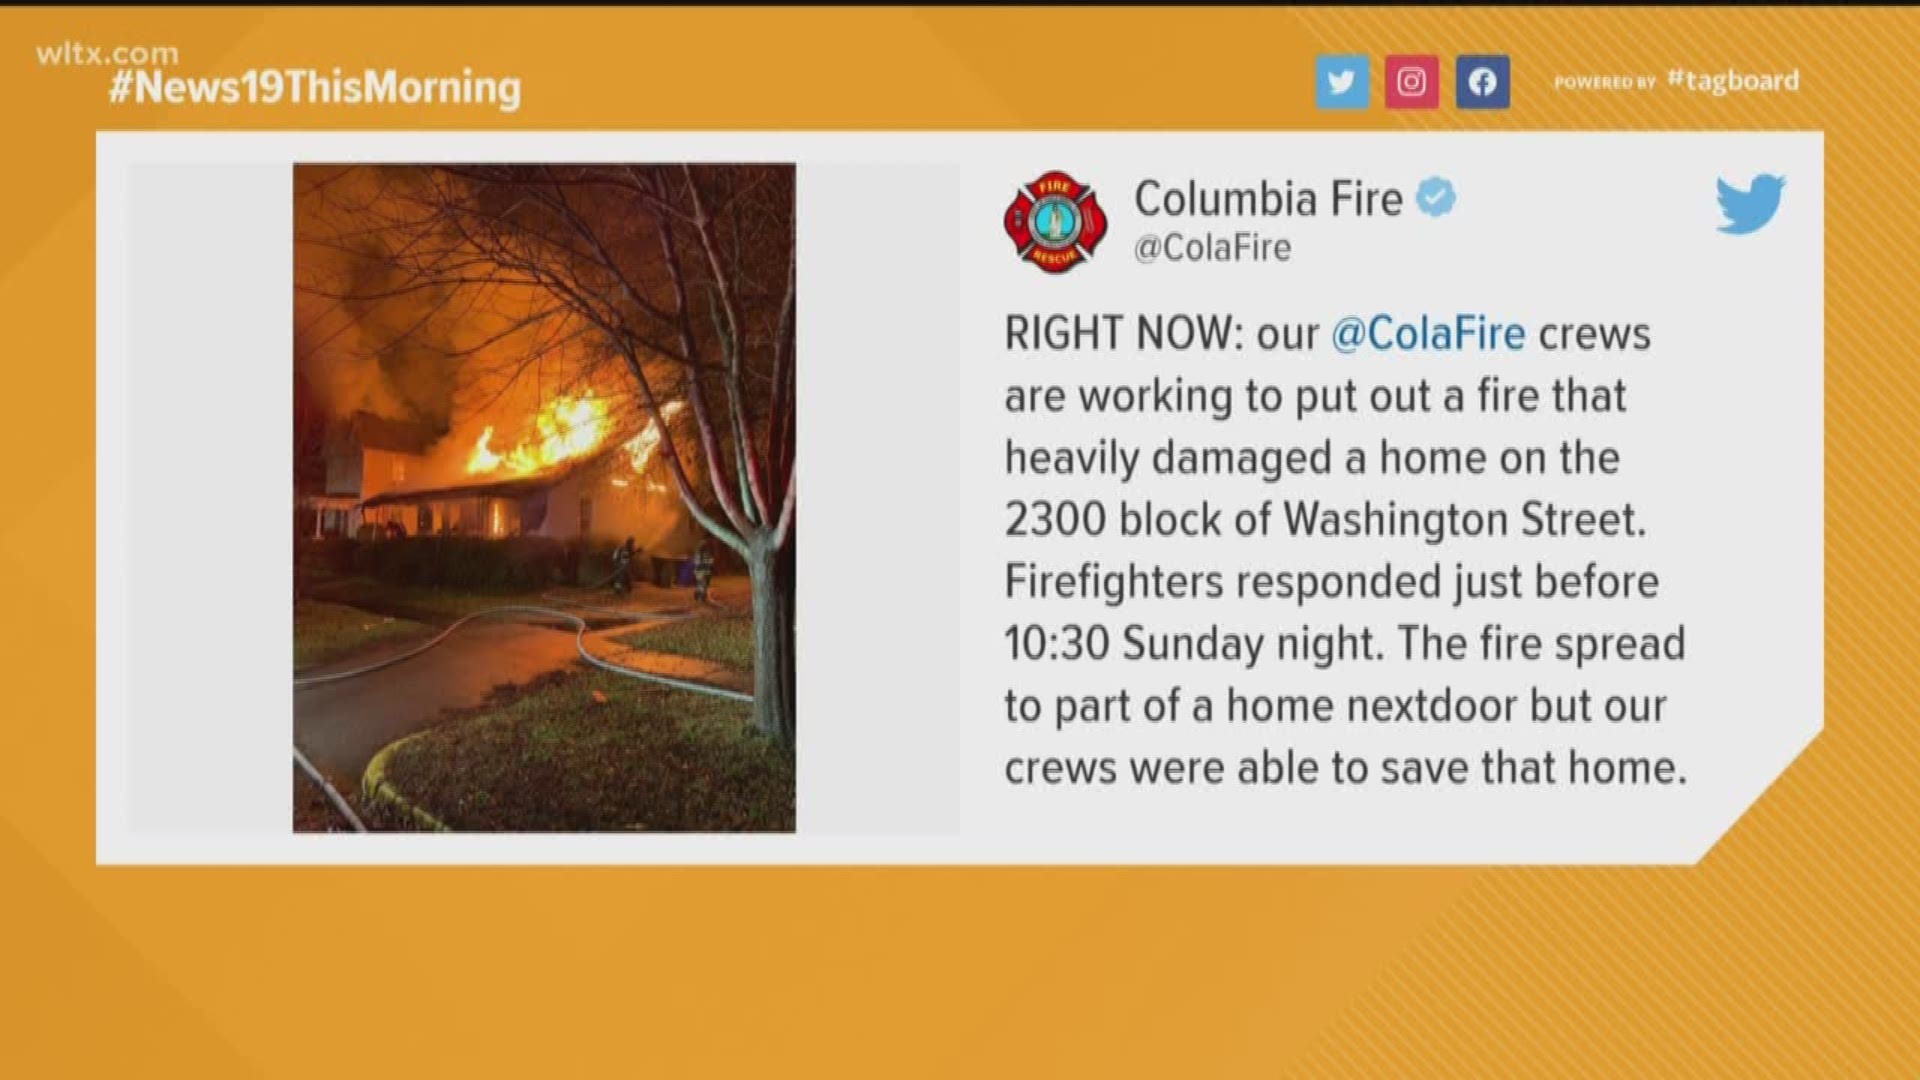 Officials with Columbia Fire say they are still working to determine what caused the fire.